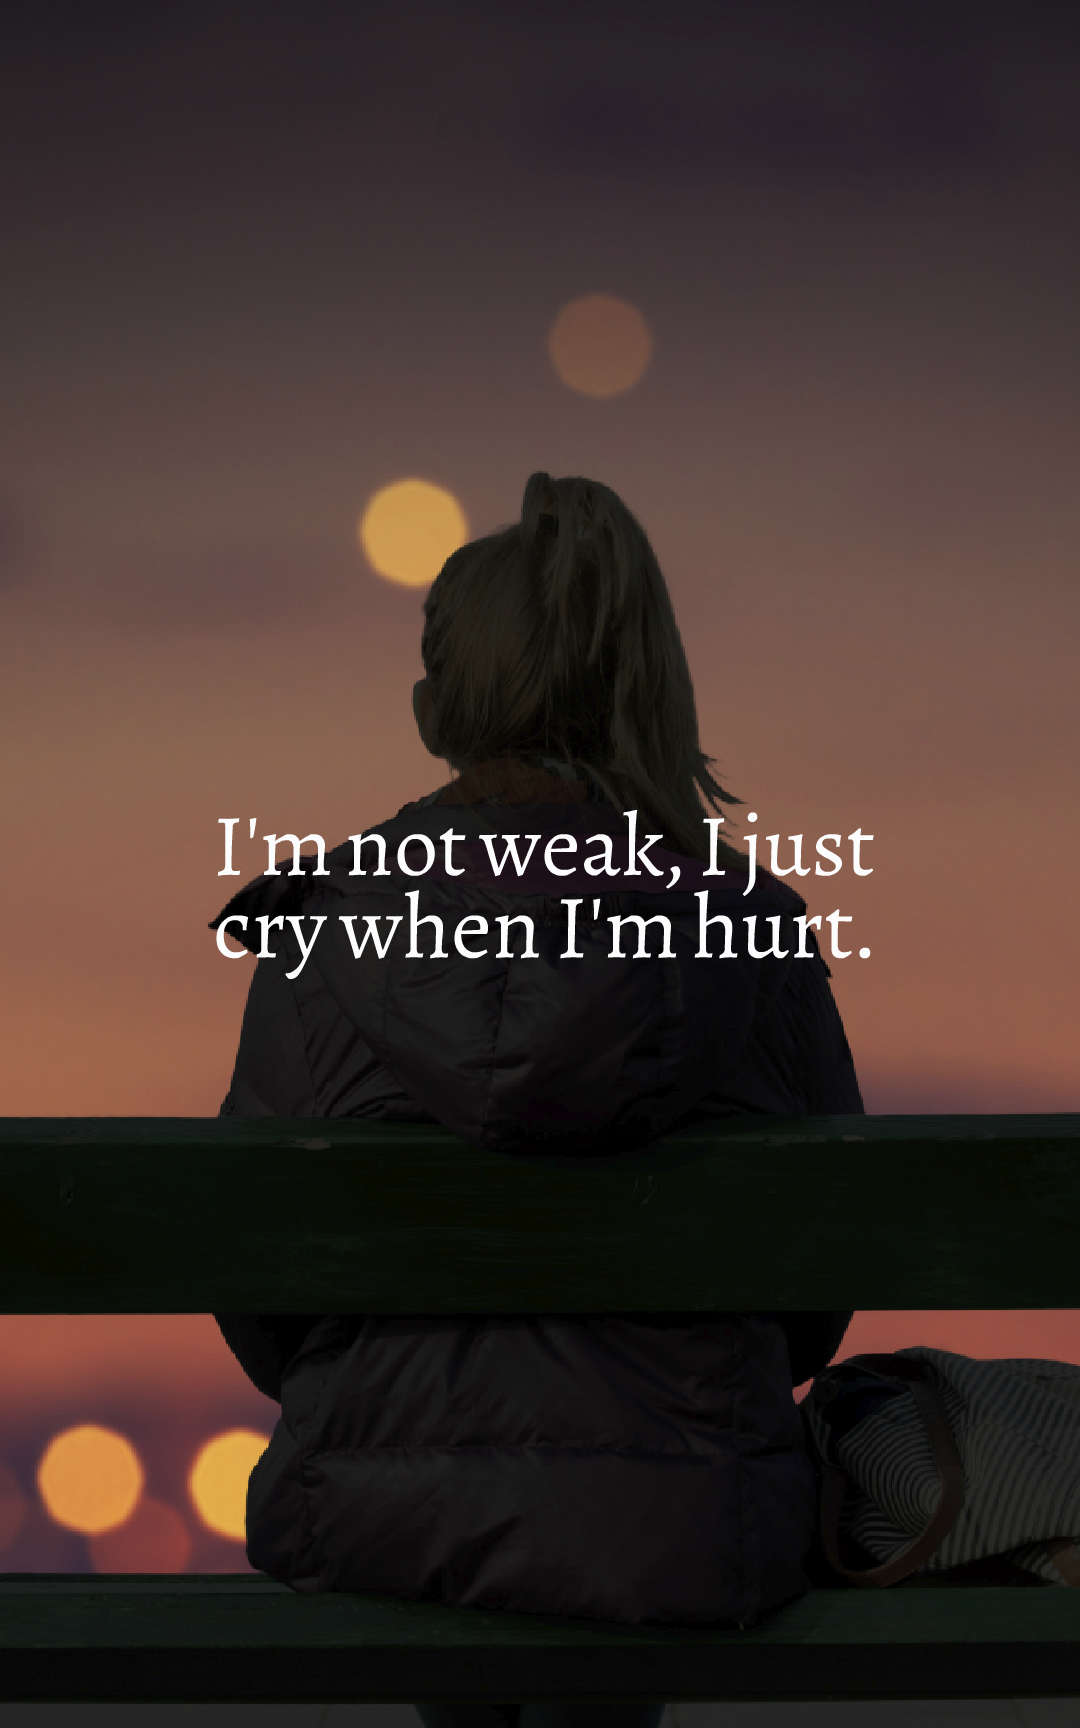 I'm not weak, I just cry when I'm hurt.